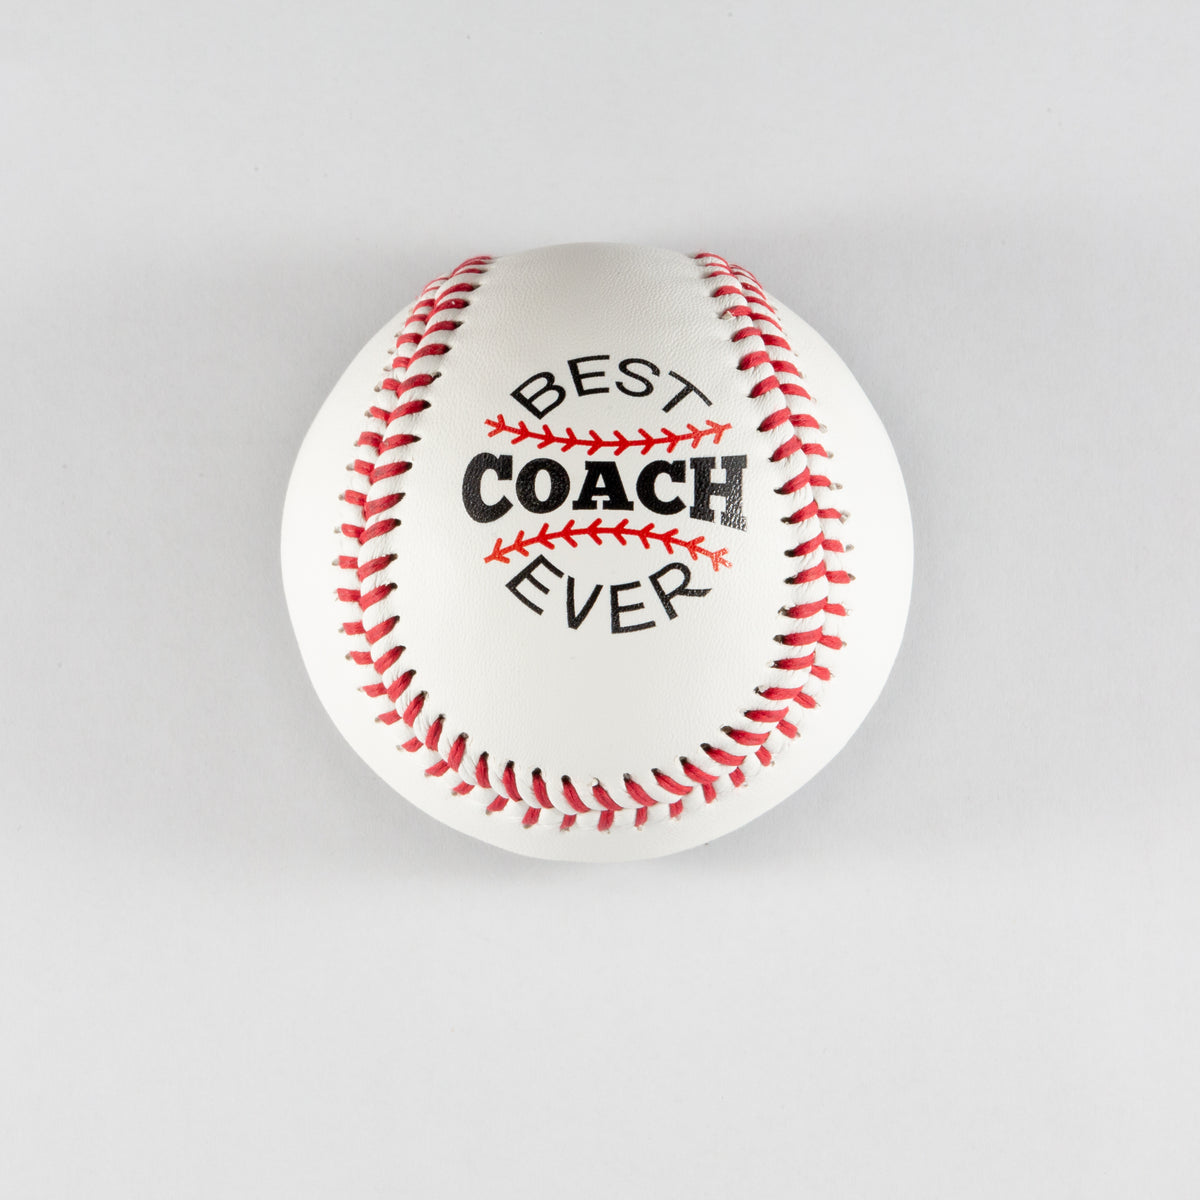 Printed Baseball with Best Coach Ever Design 